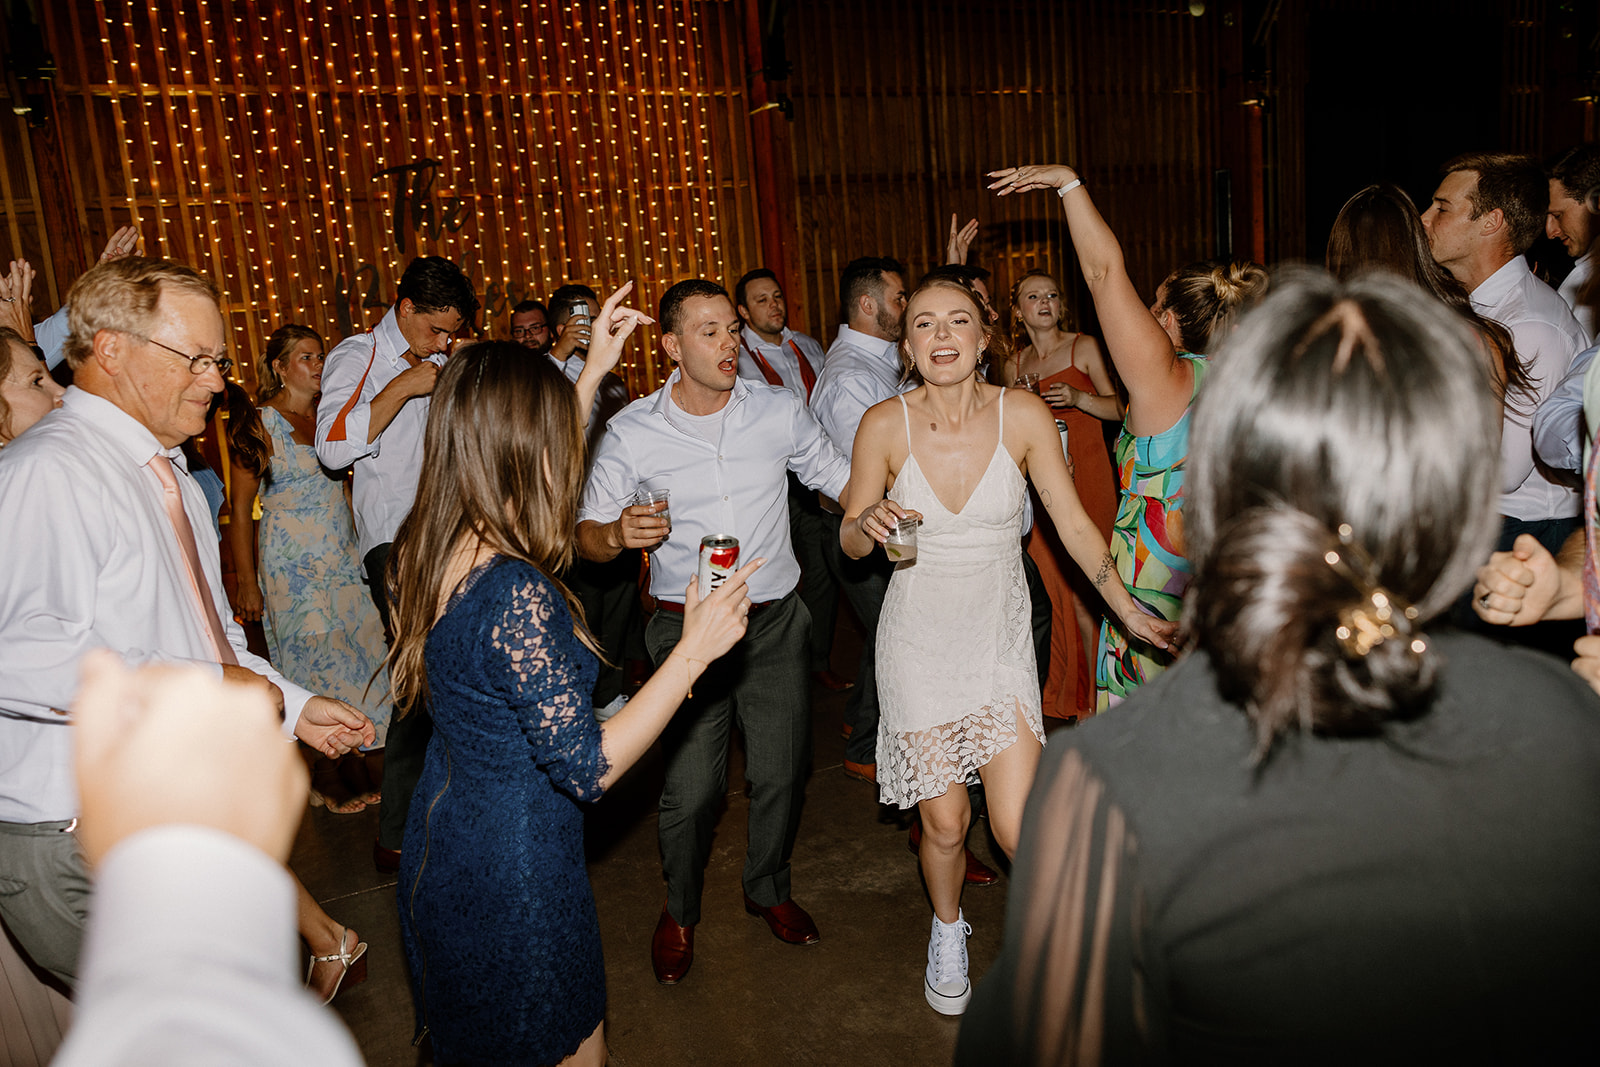 Bride and groom dance the night away with their guests